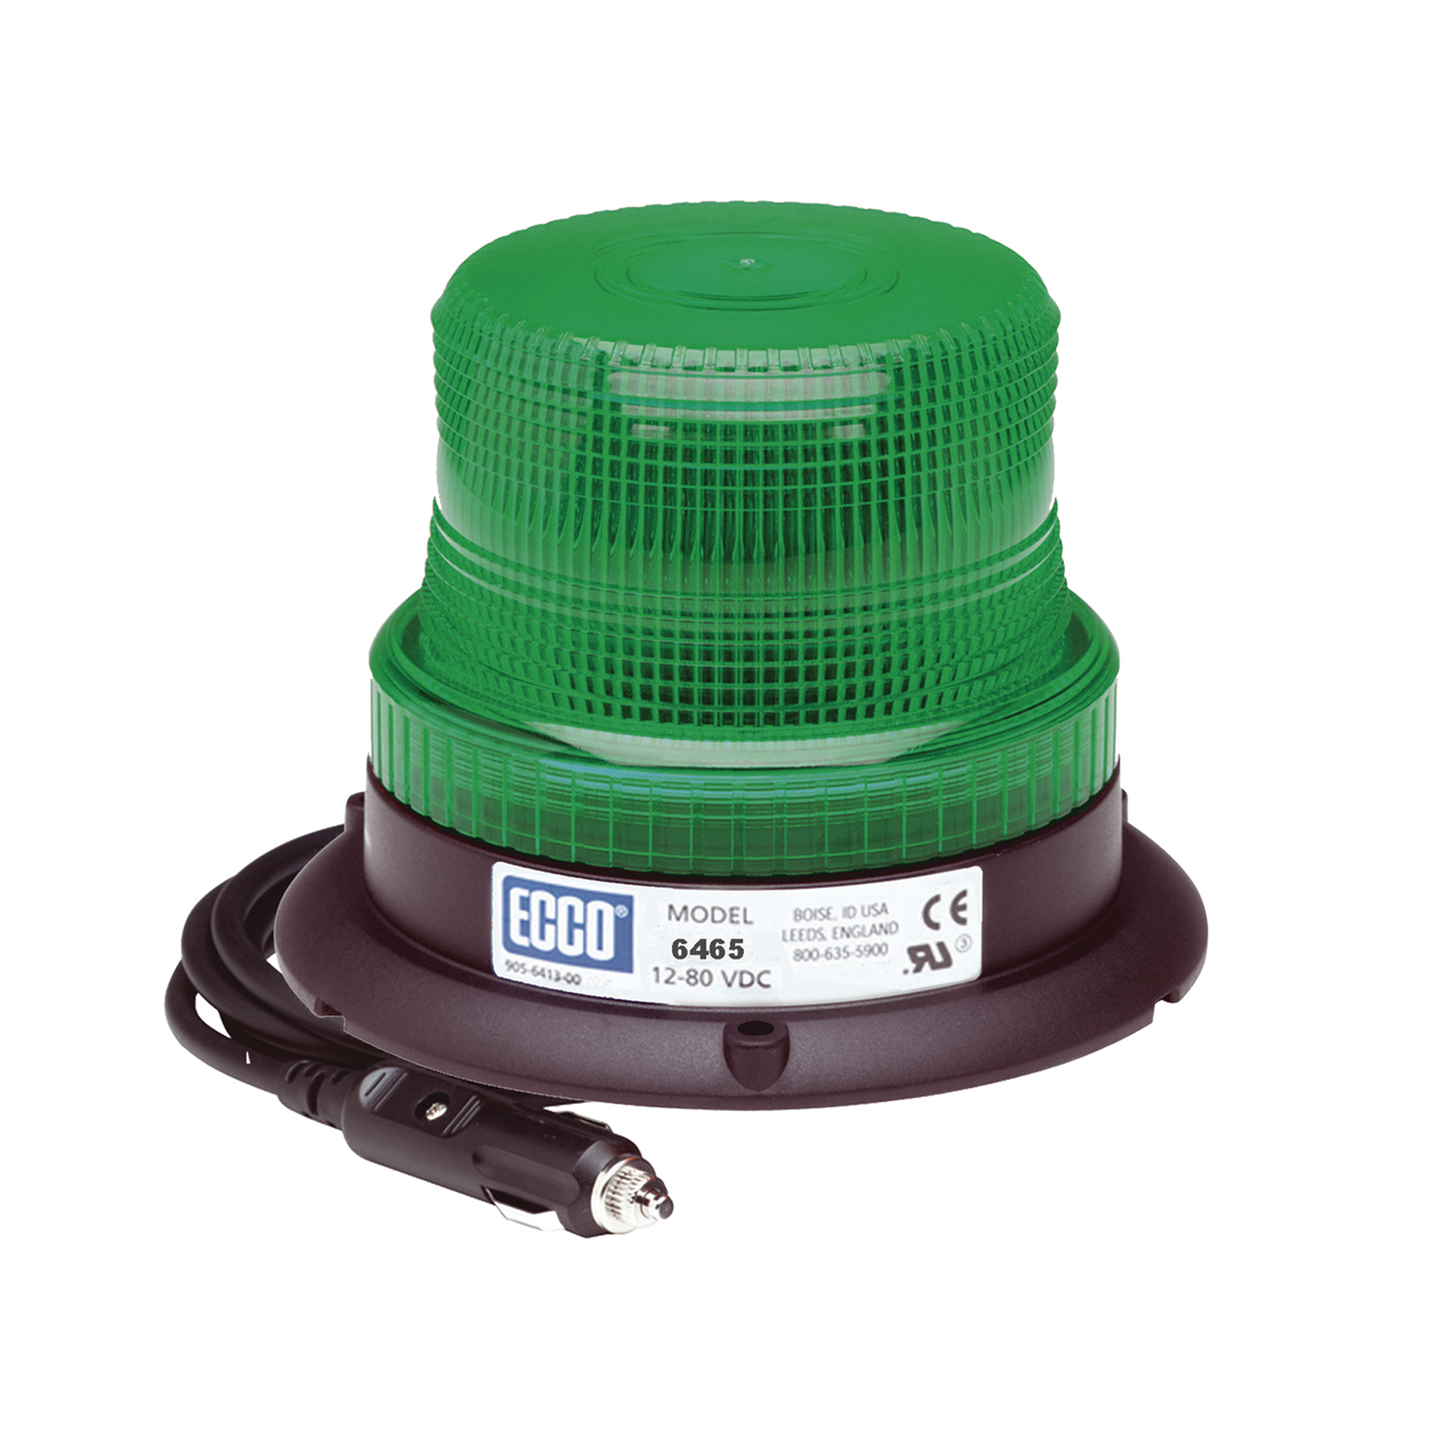 Green Mini LED Beacon X6465 Series with vacuum magnetic mount